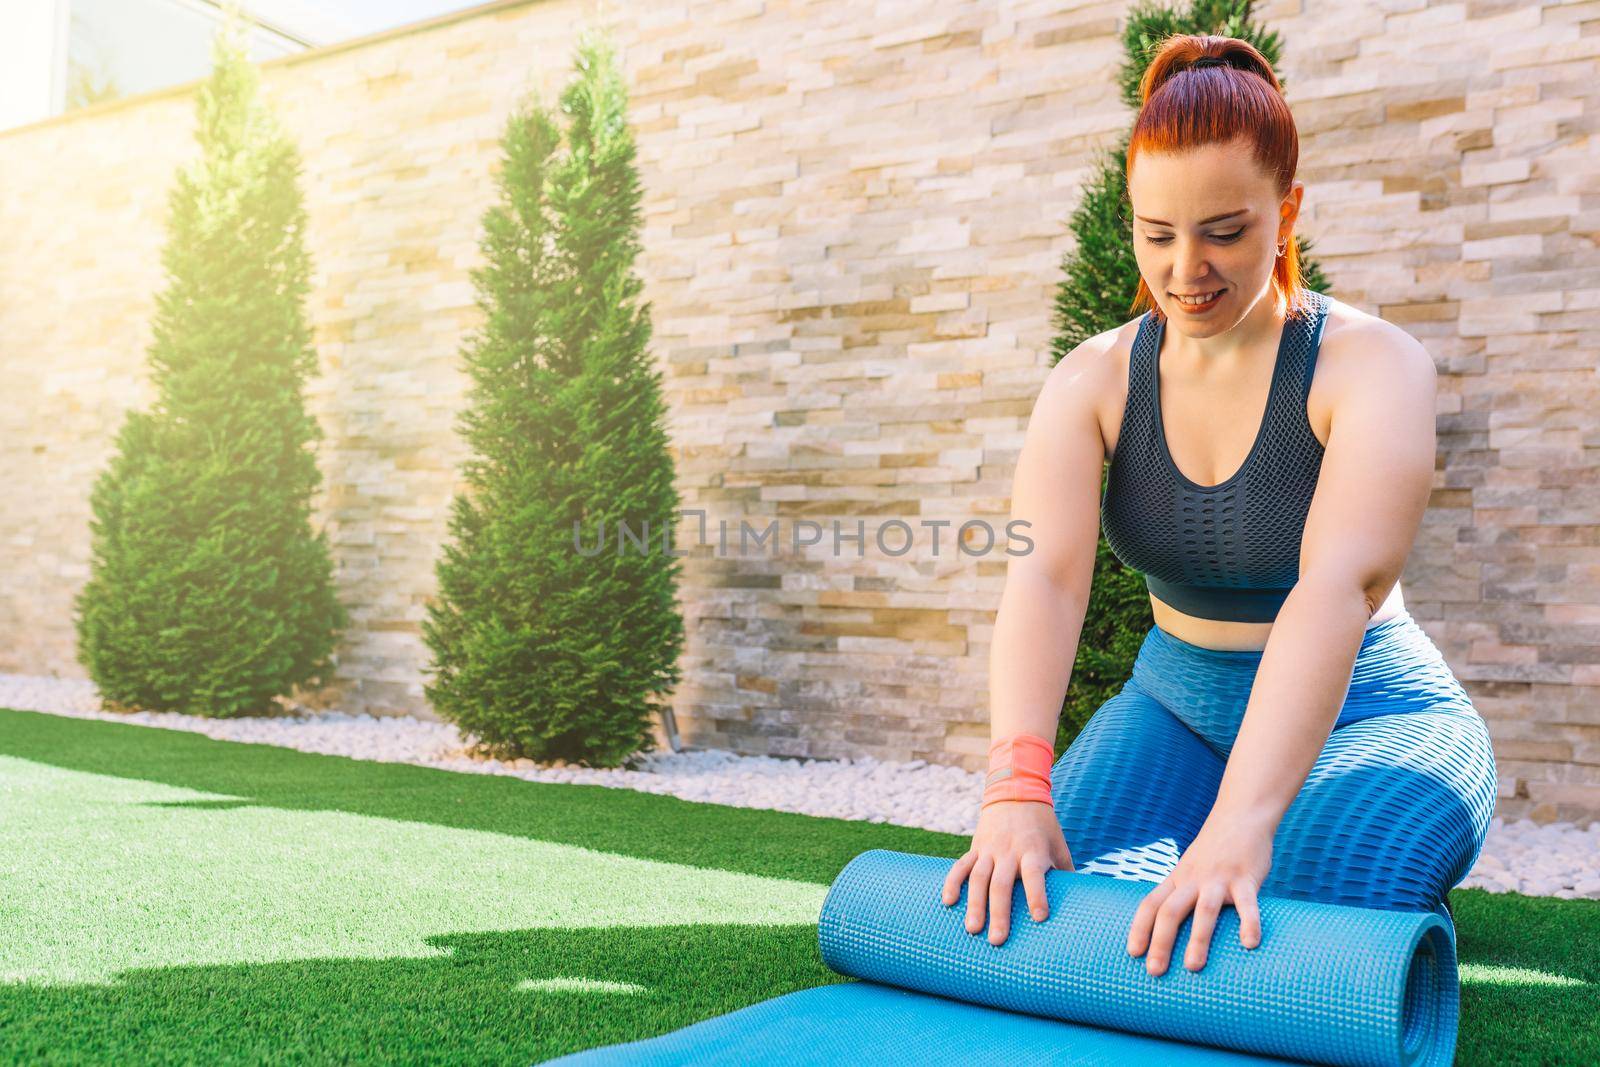 Attractive young fitness girl exercising outdoors in the garden of her home, preparing for stretching exercises. health and wellness concept. by CatPhotography